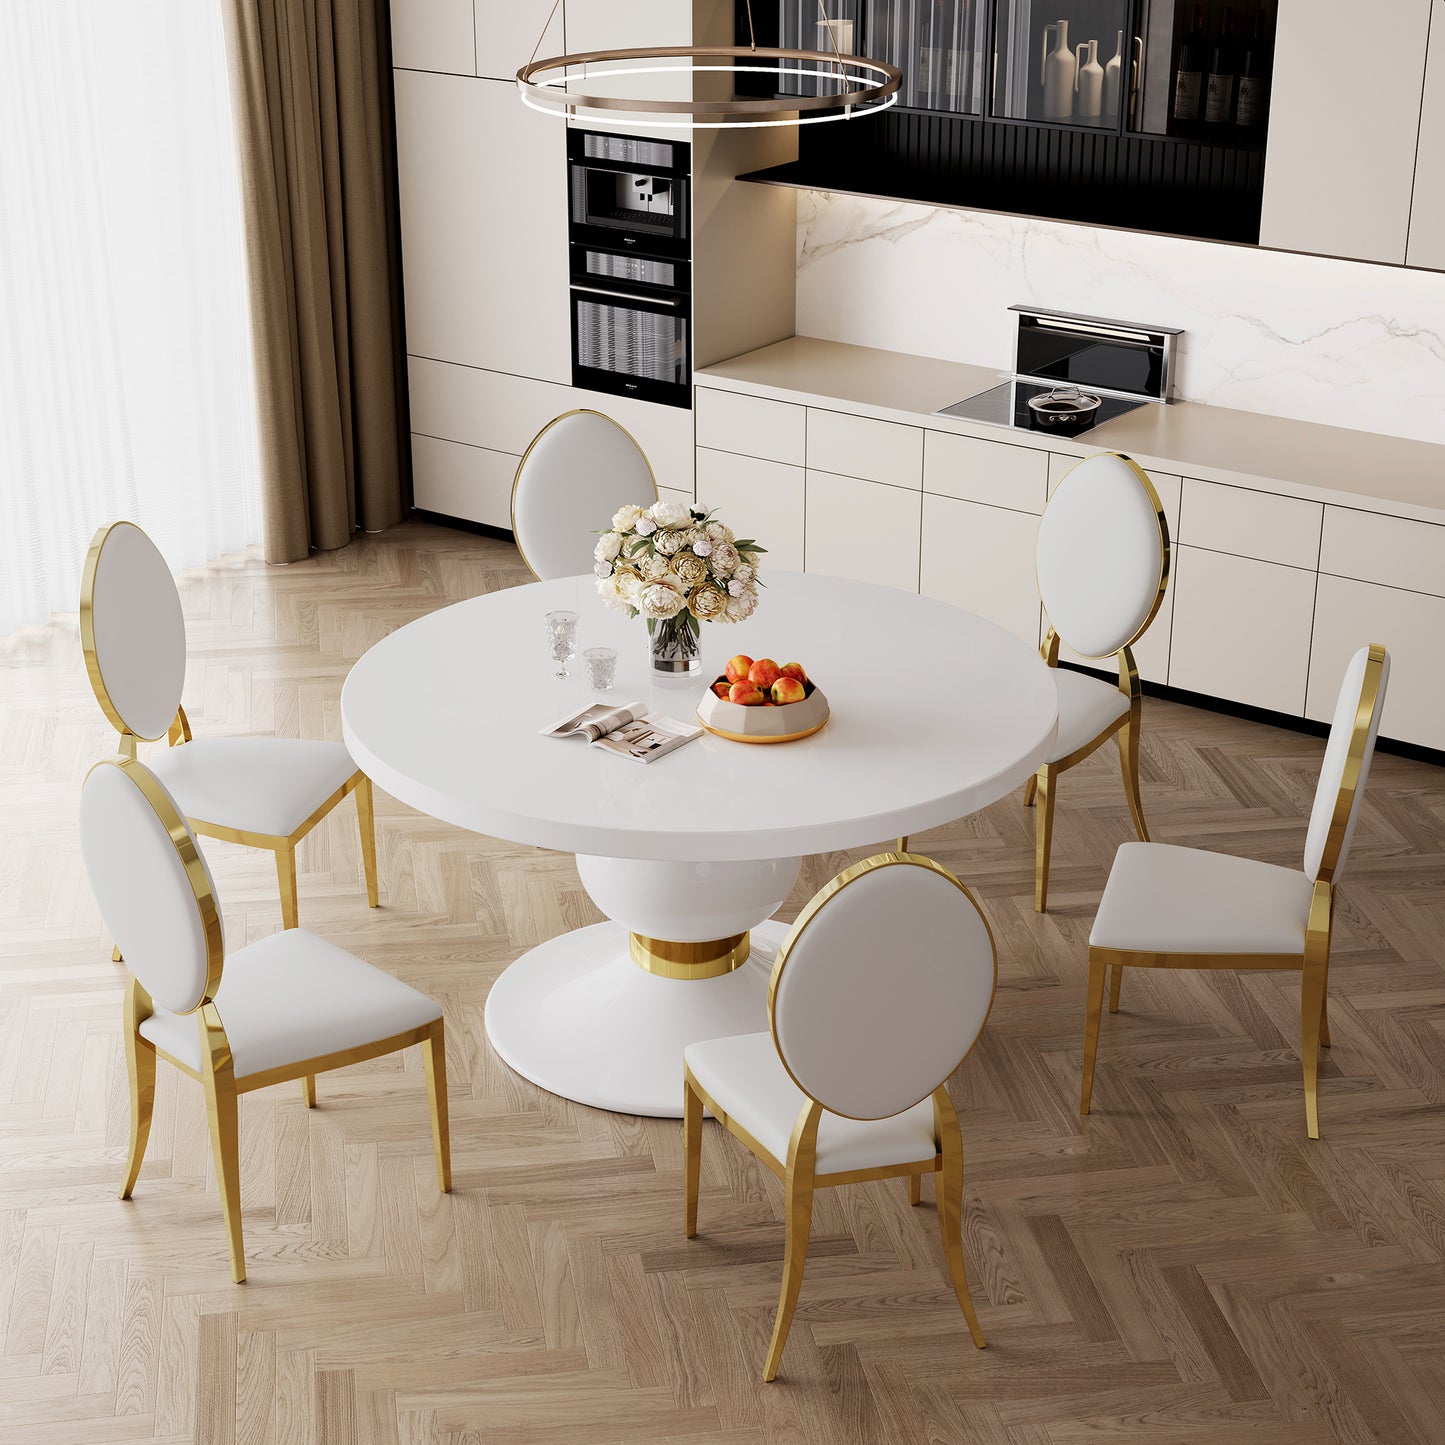 59" round white mdf dining table, base with gold finish stainless steel circle